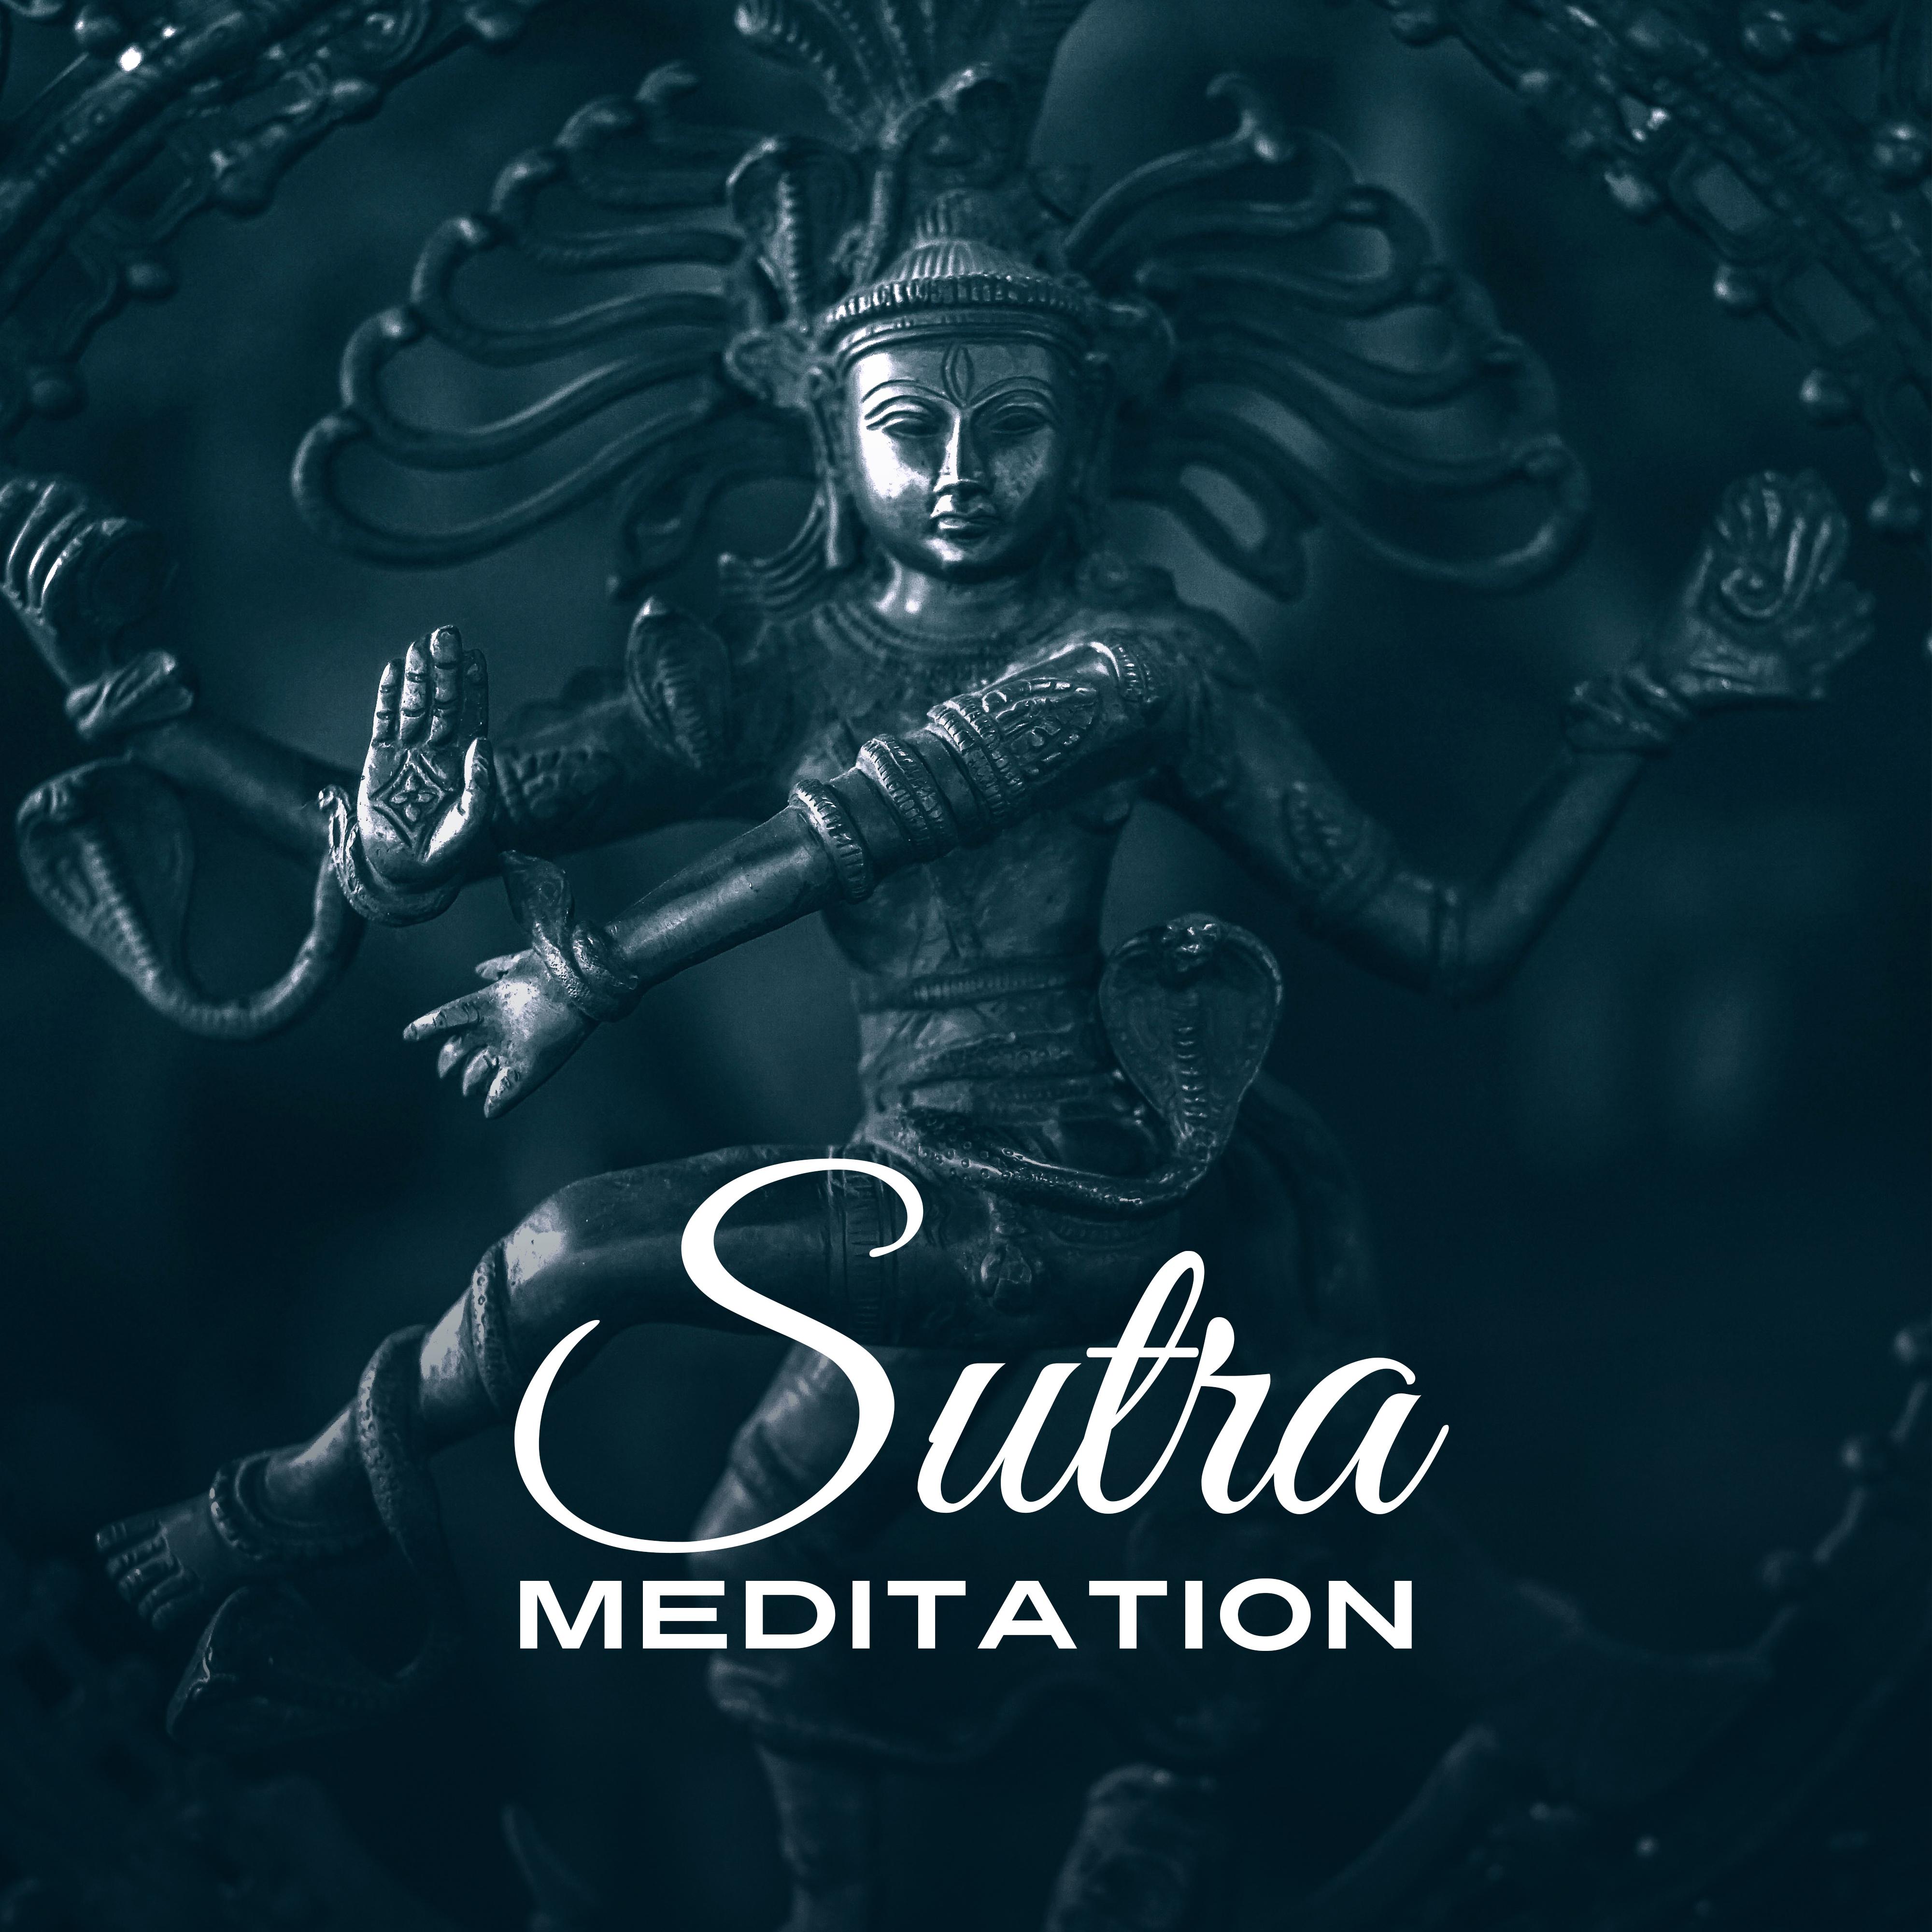 Sutra Meditation  Music for Yoga Meditation, Asian Zen, Buddha Lounge, Deep Relaxation, New Age Music 2017, Calm of Mind